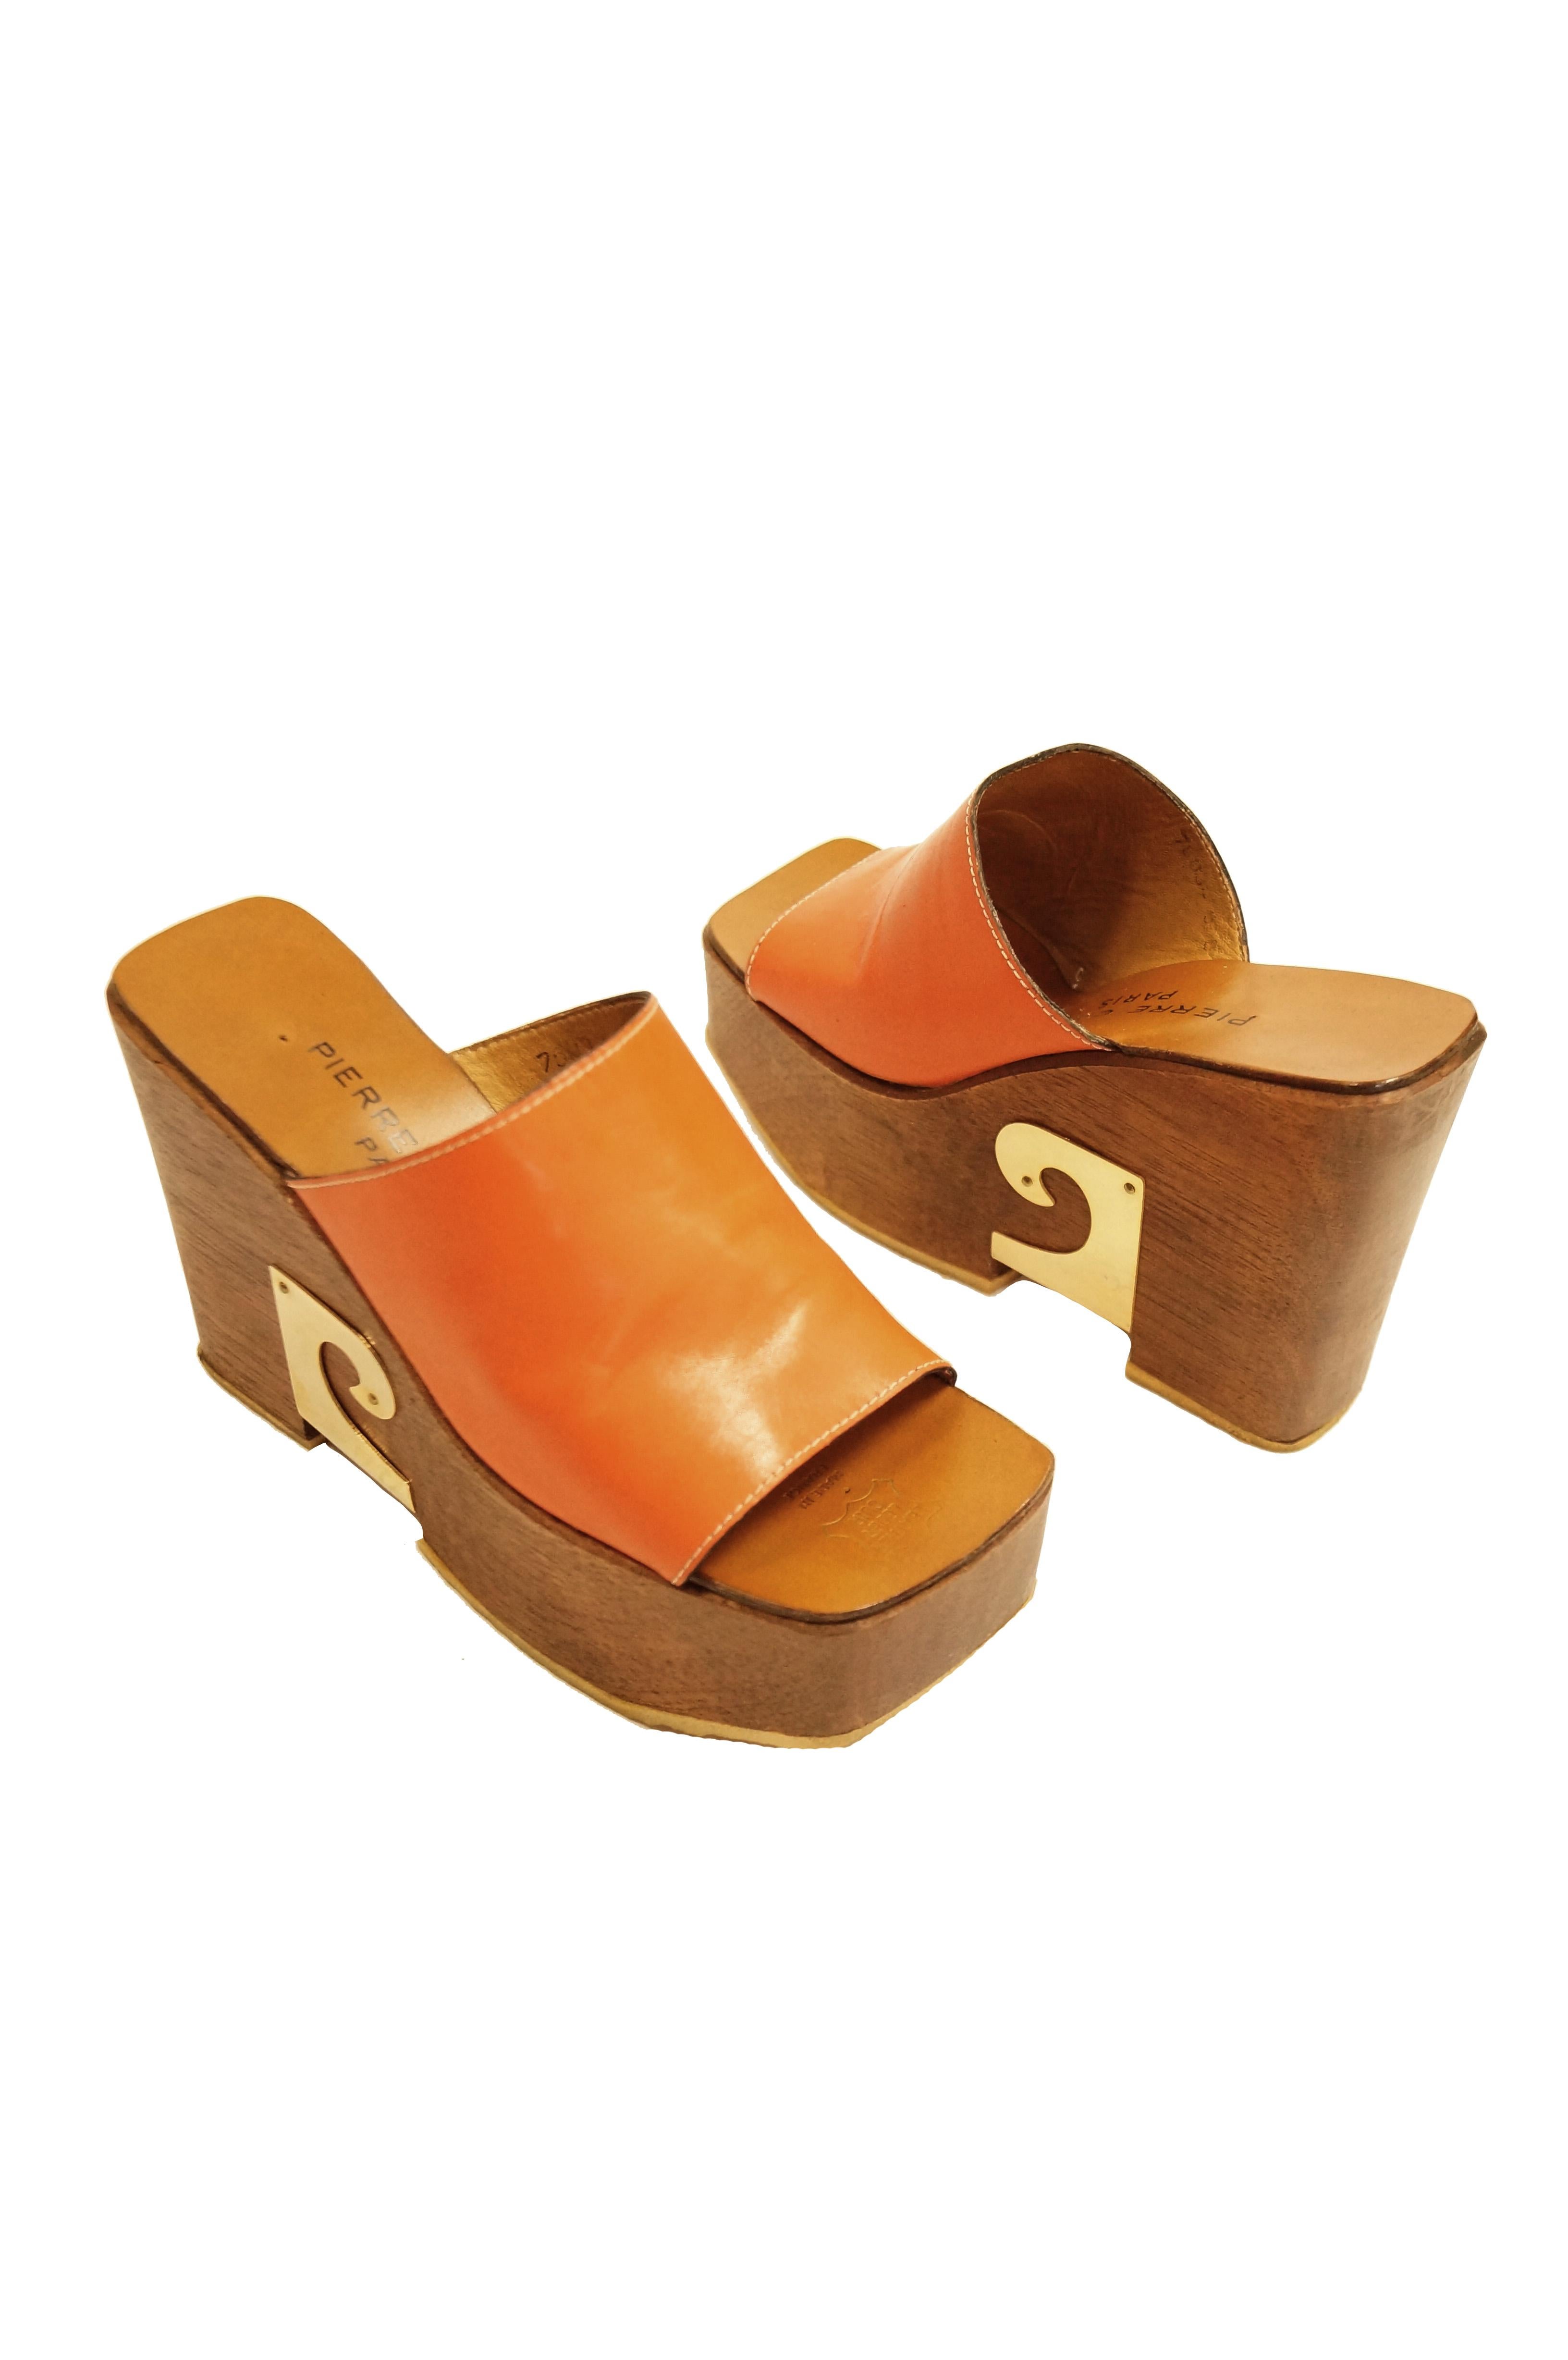 Amazing wooden clog sole shoes by Pierre Cardin. These tall platform heels feature a deep orange mule top strap and a leather sole. The thick wooden platform heels are contrasted sharply the iconic Pierre Cardin swirl logo on the outer side of the